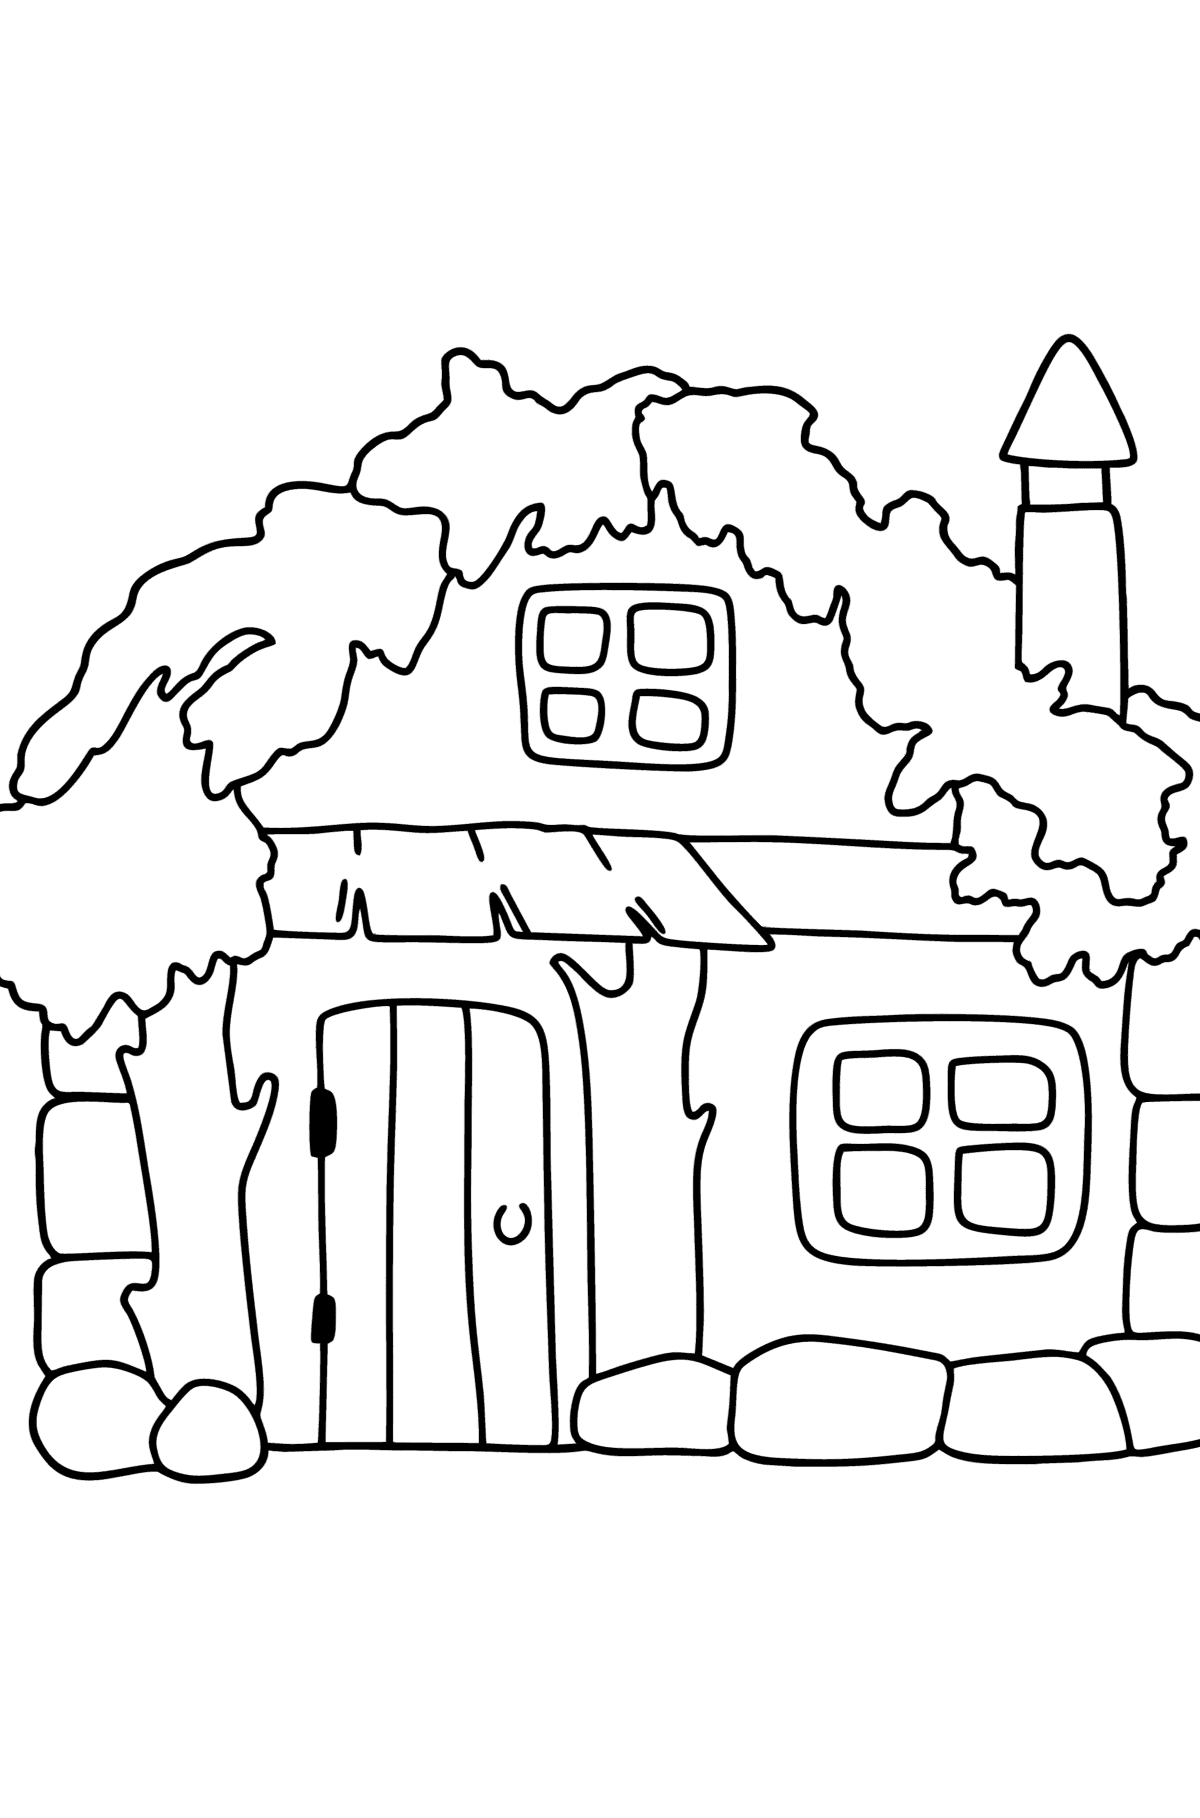 Hut coloring page - Coloring Pages for Kids